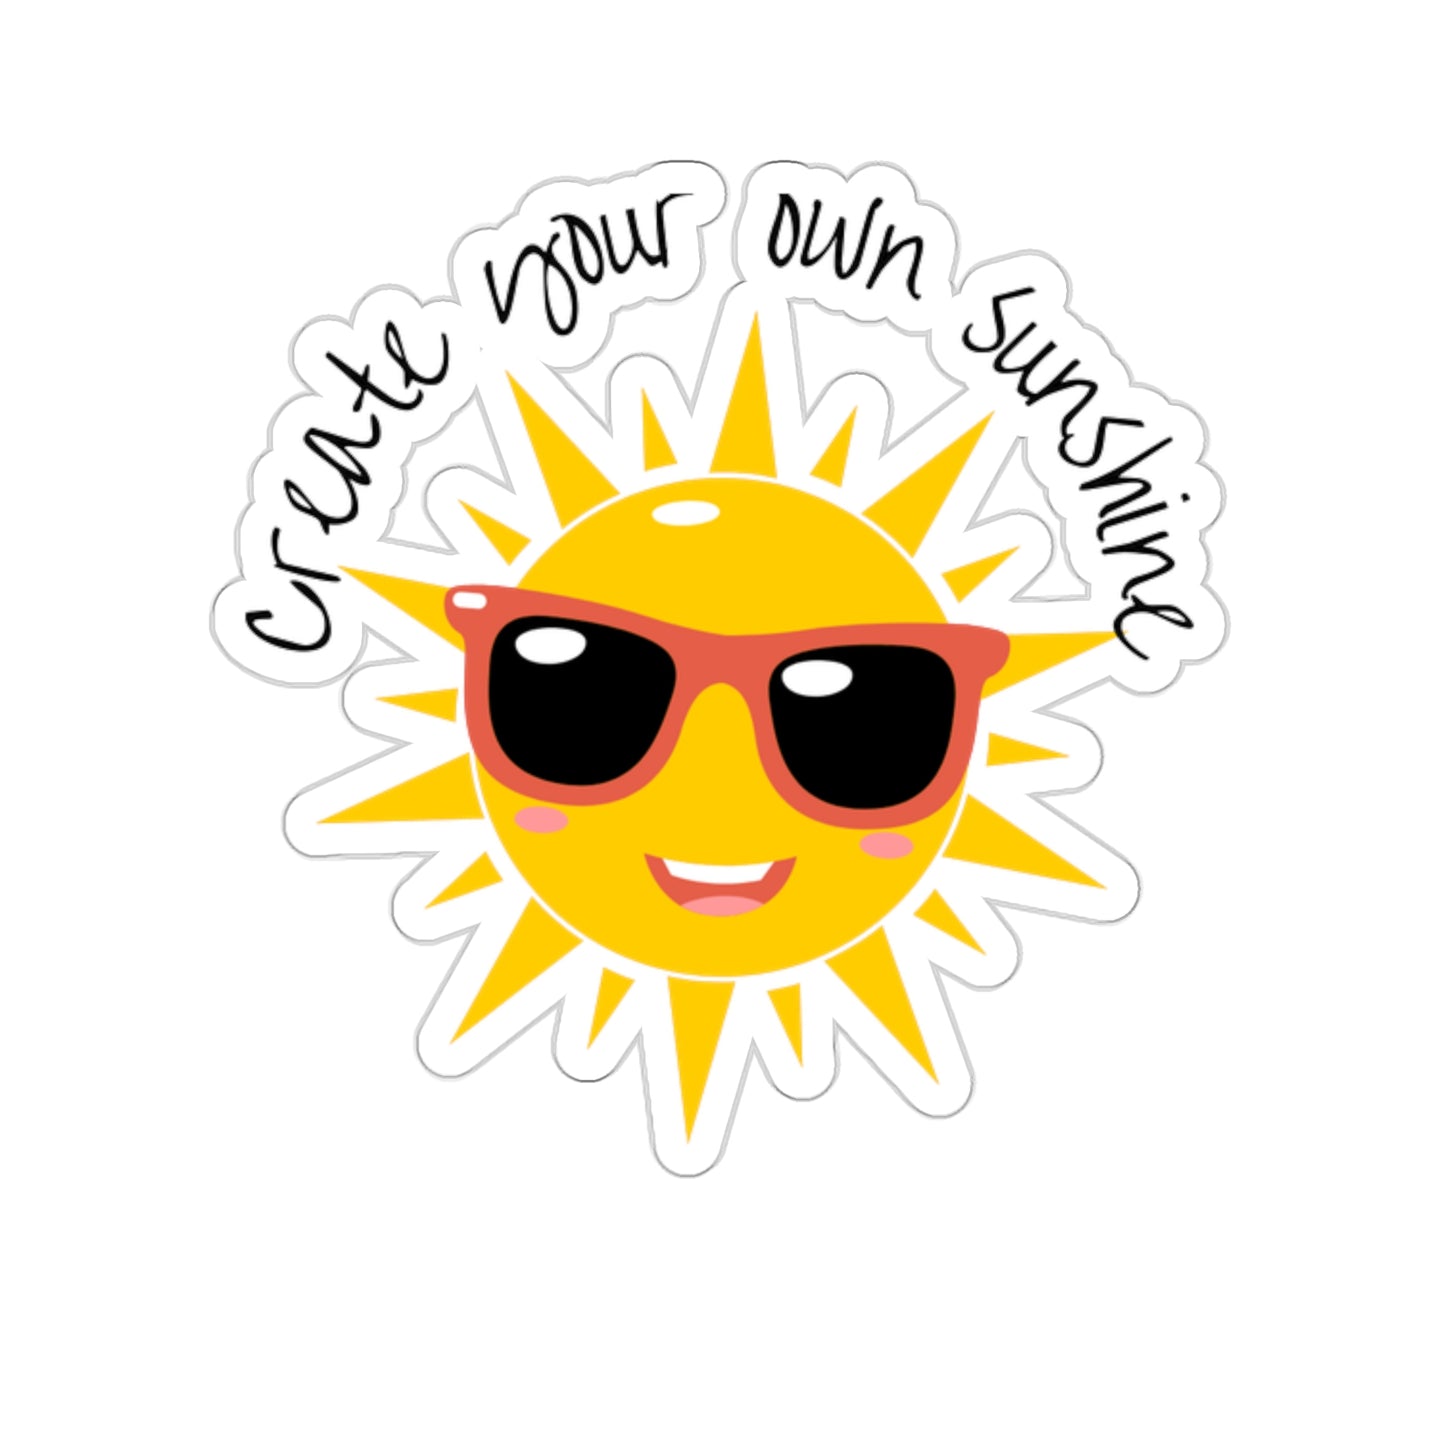 Create your own sunshine Kiss-Cut Stickers